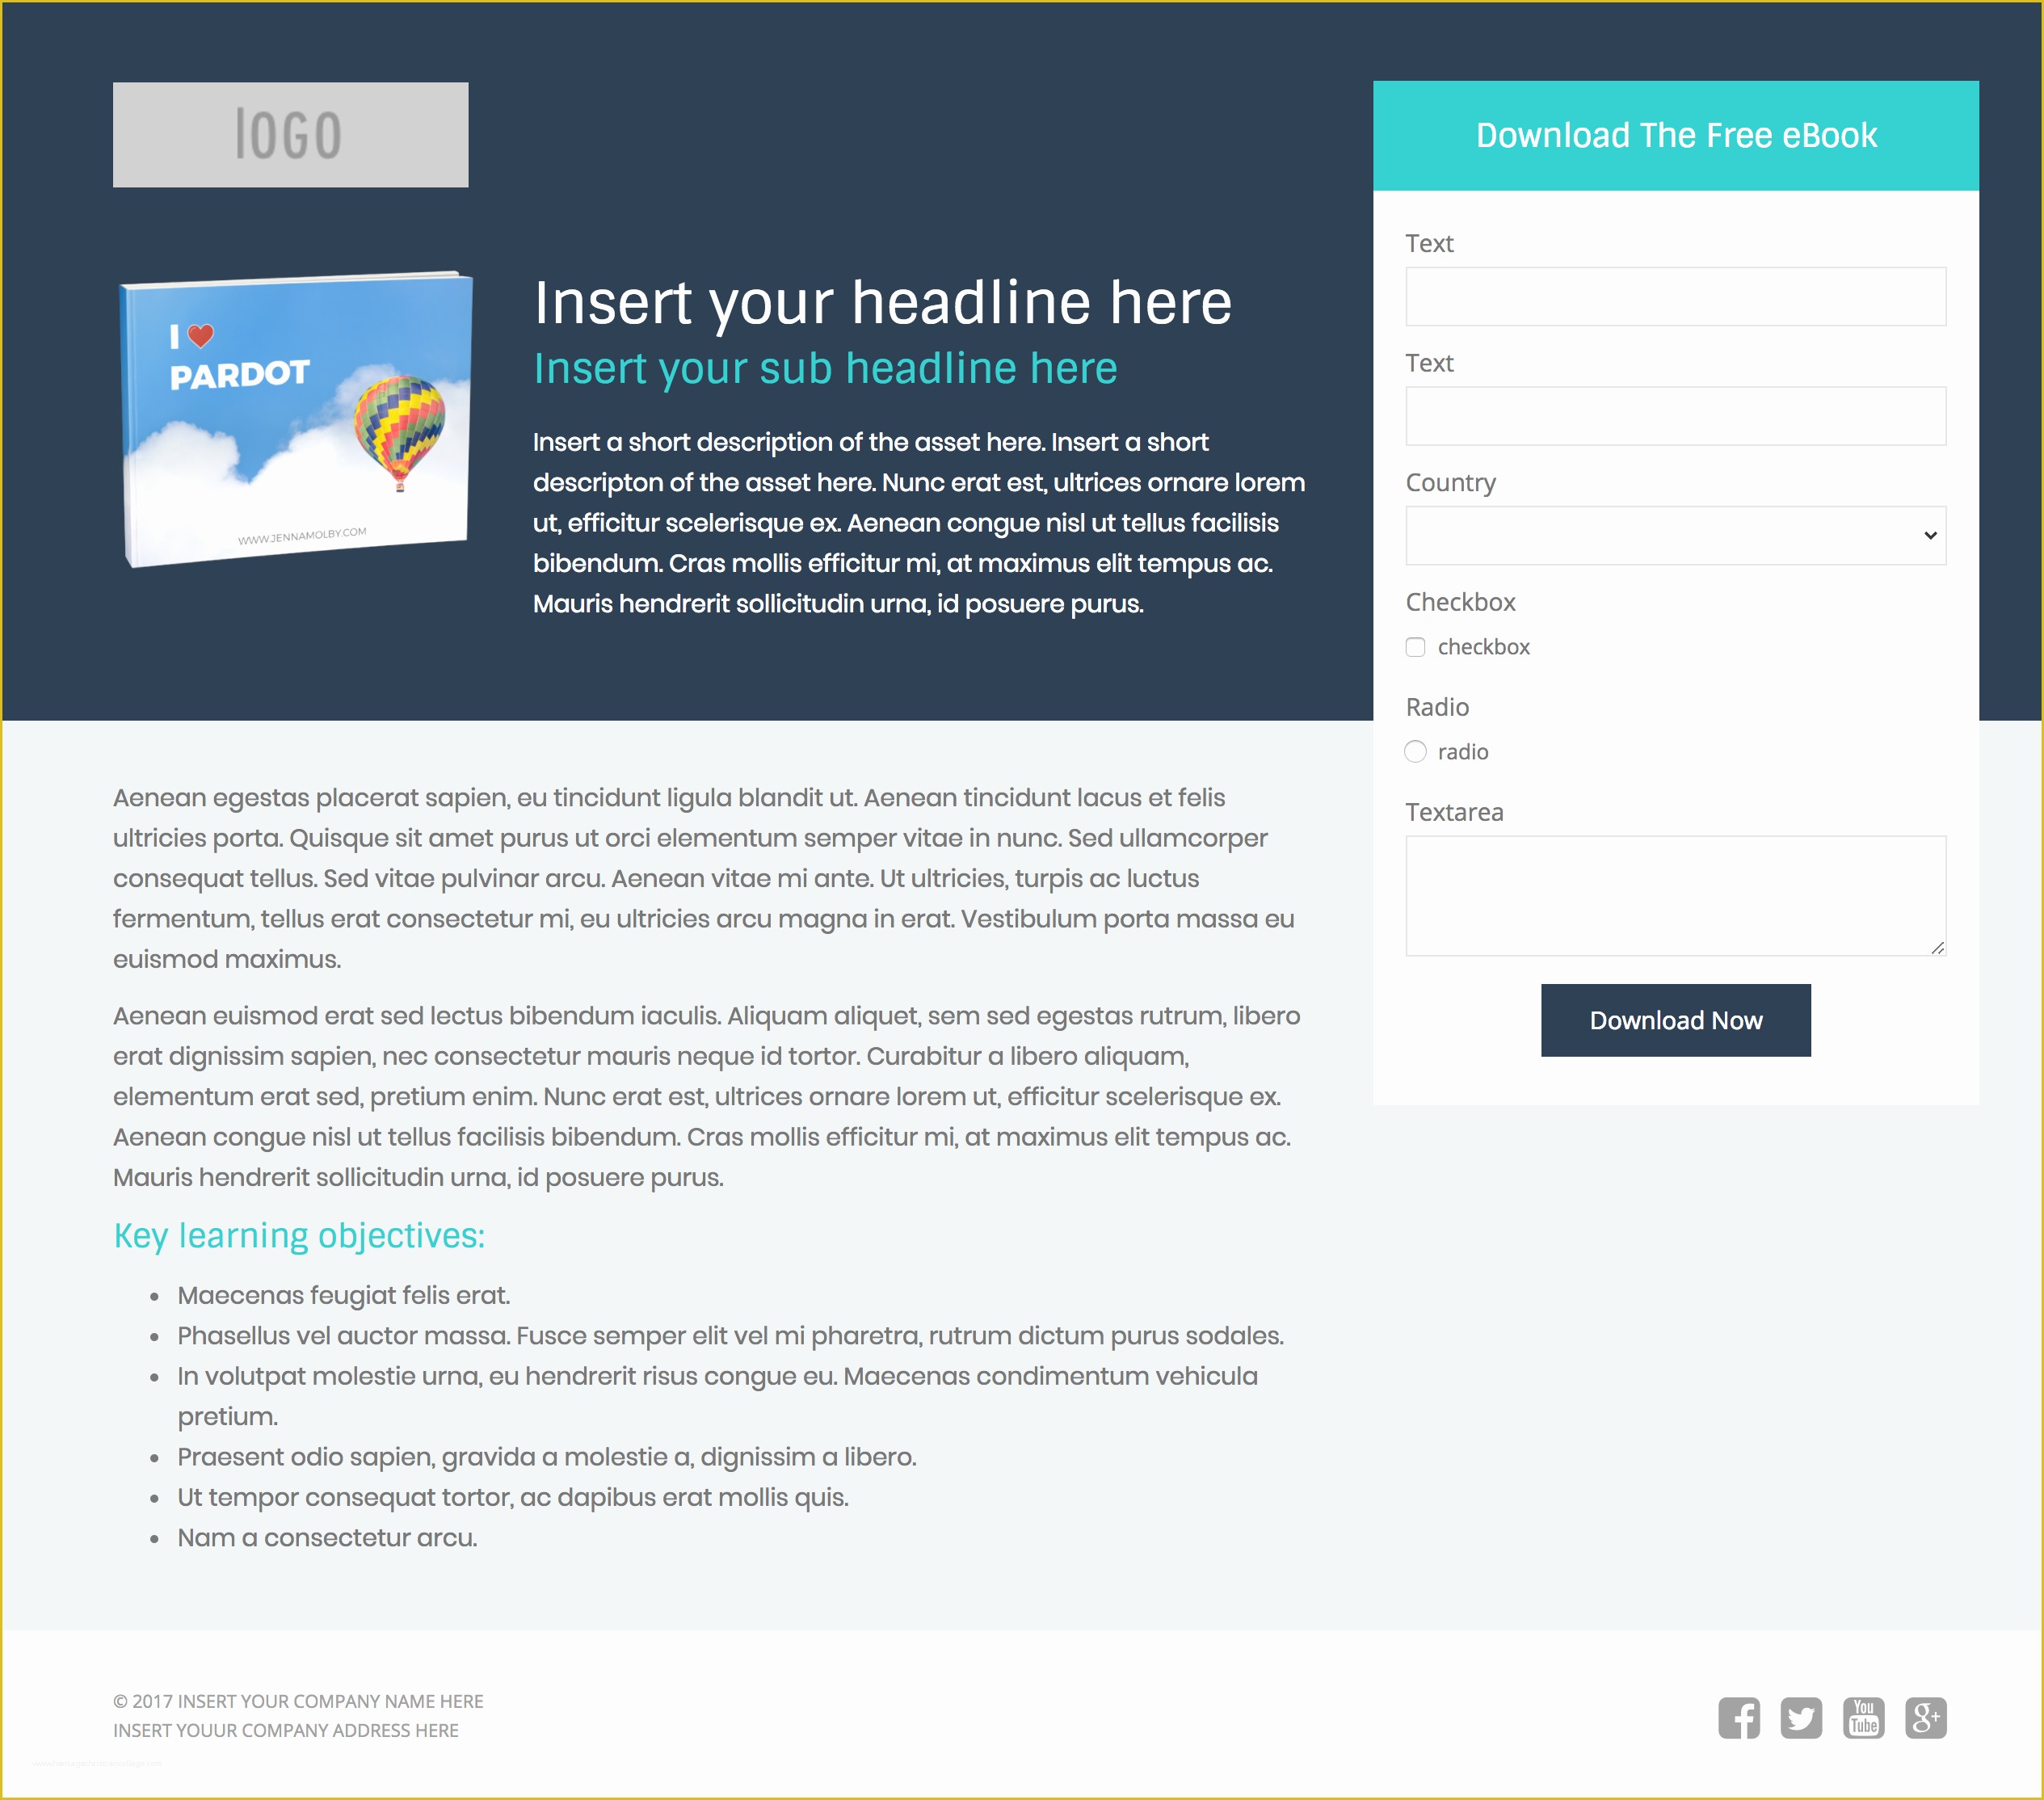 Landing Page Templates Free Download In HTML Of 3 Free Pardot Landing Page Templates for asset Downloads